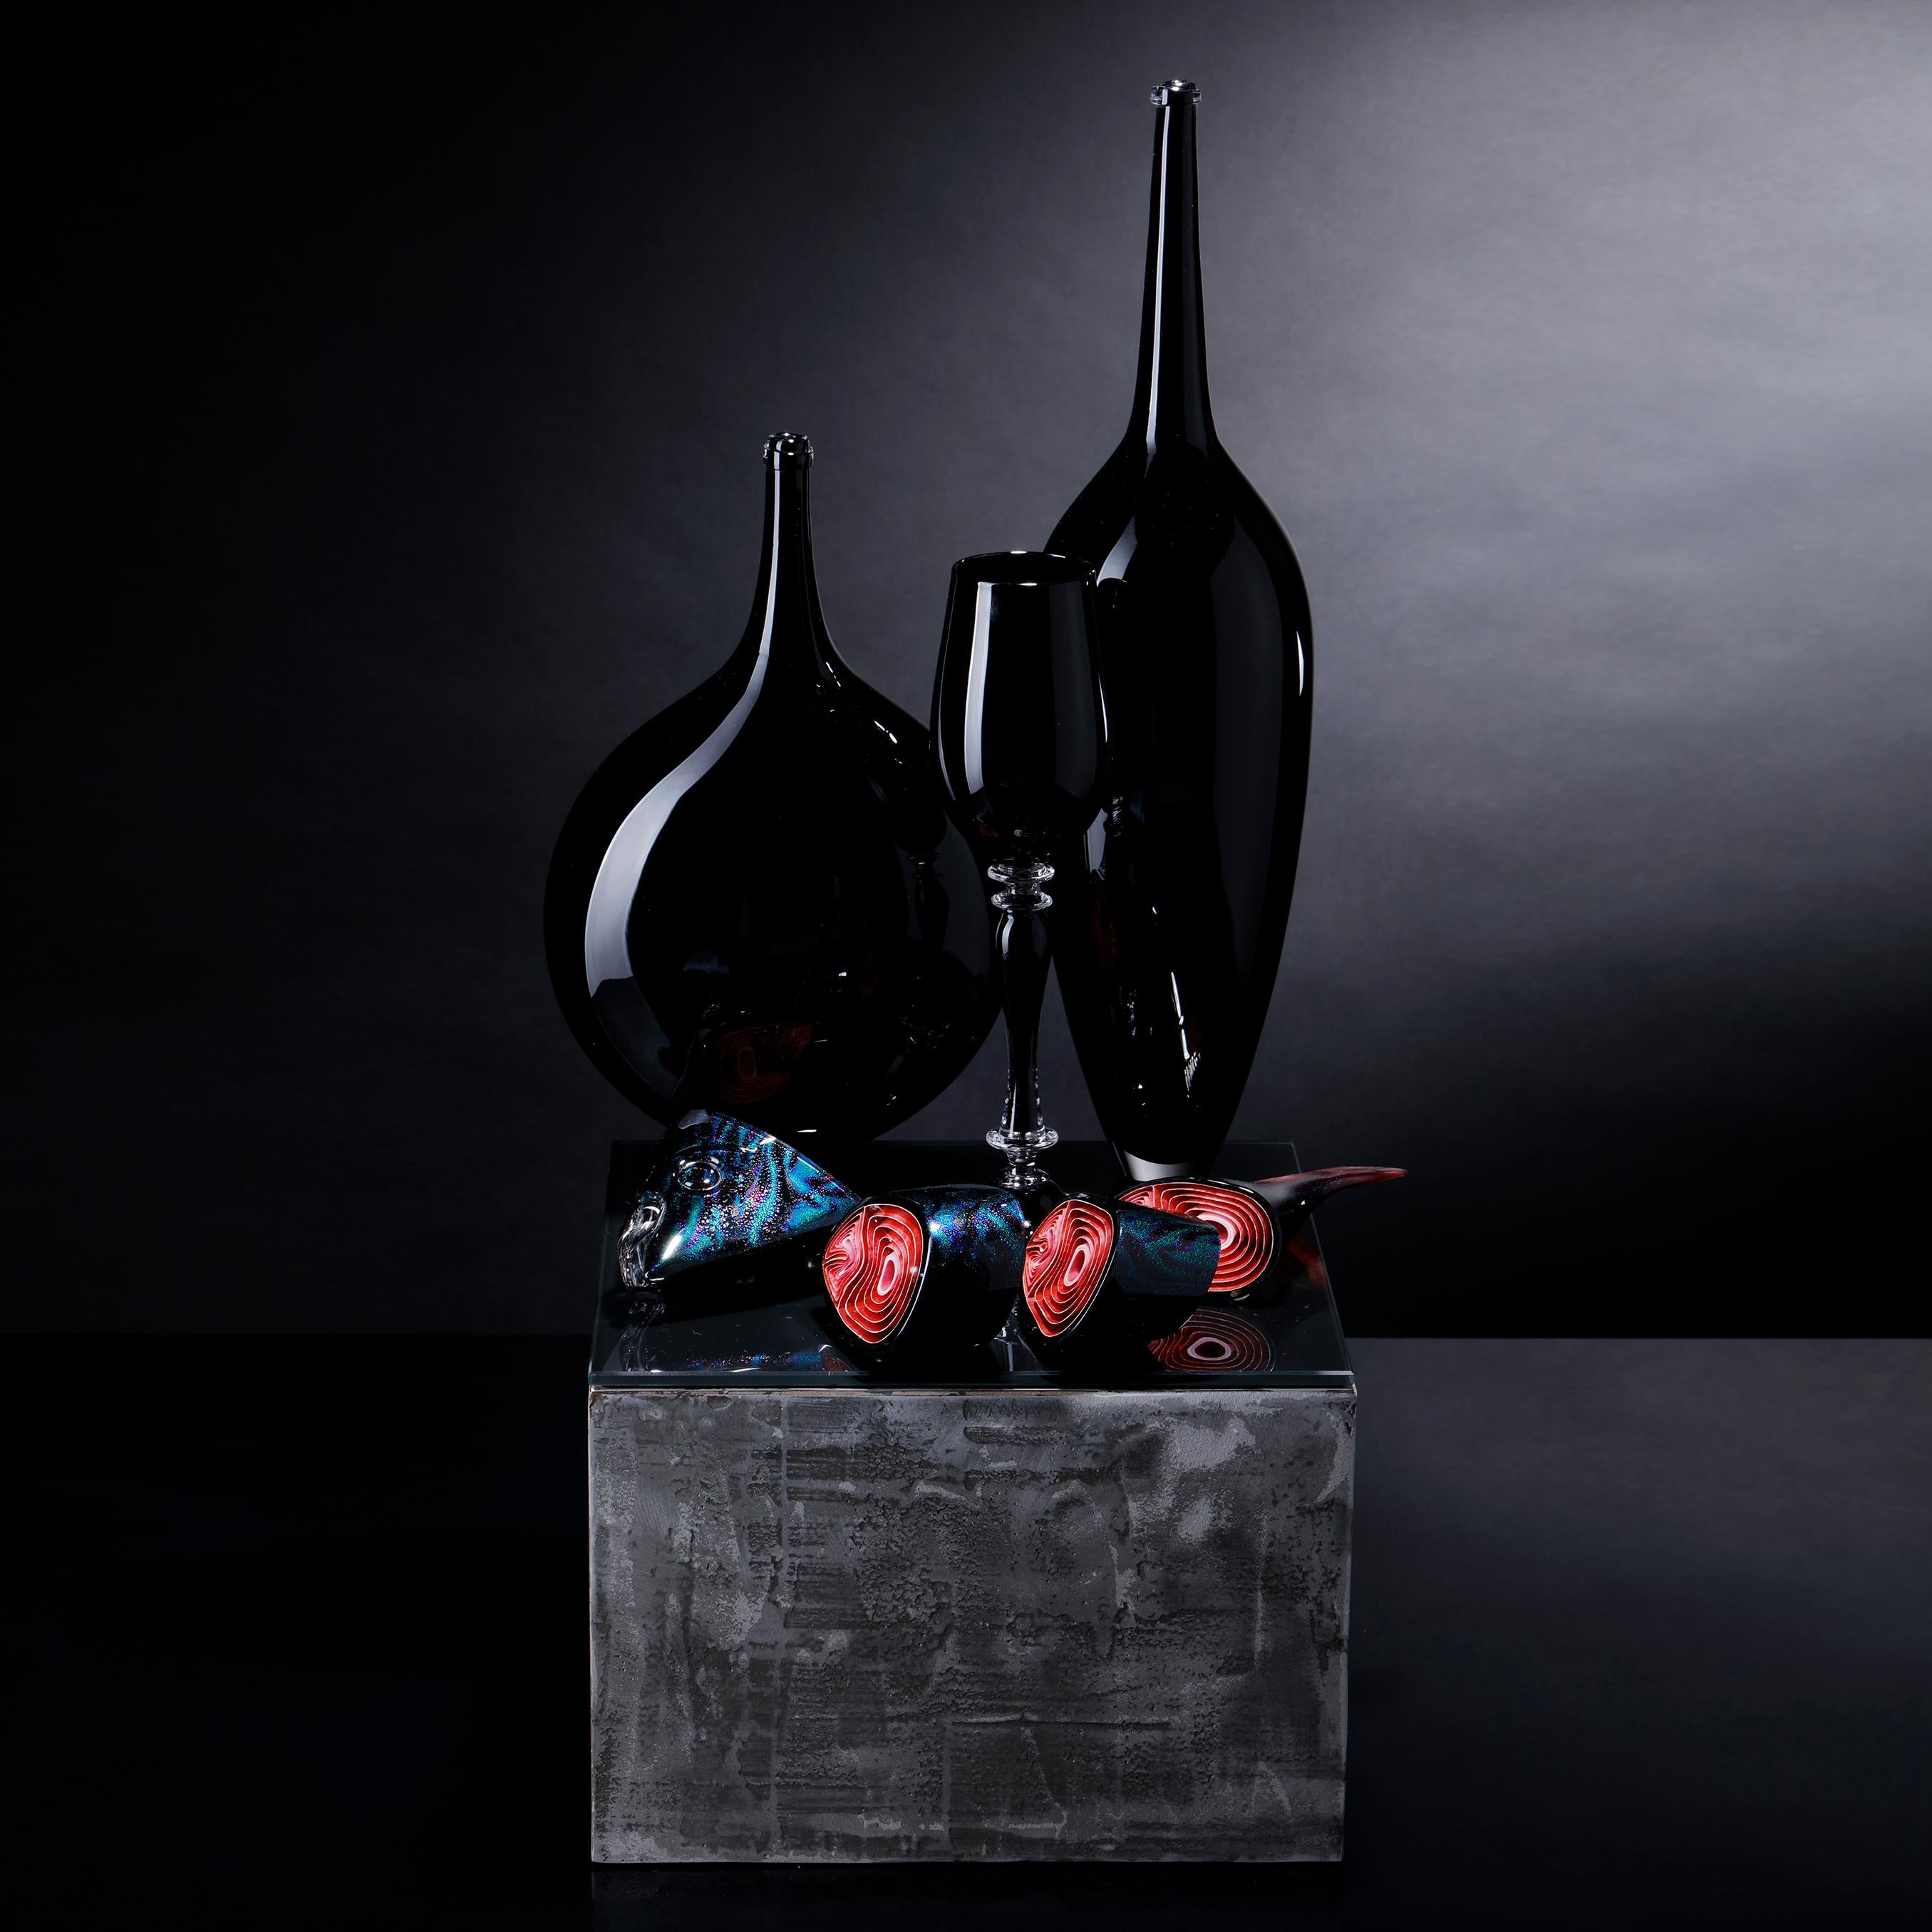 Hand-Crafted Still Life with Fish, a Black and Red Glass Still Life Art Work by Elliot Walker